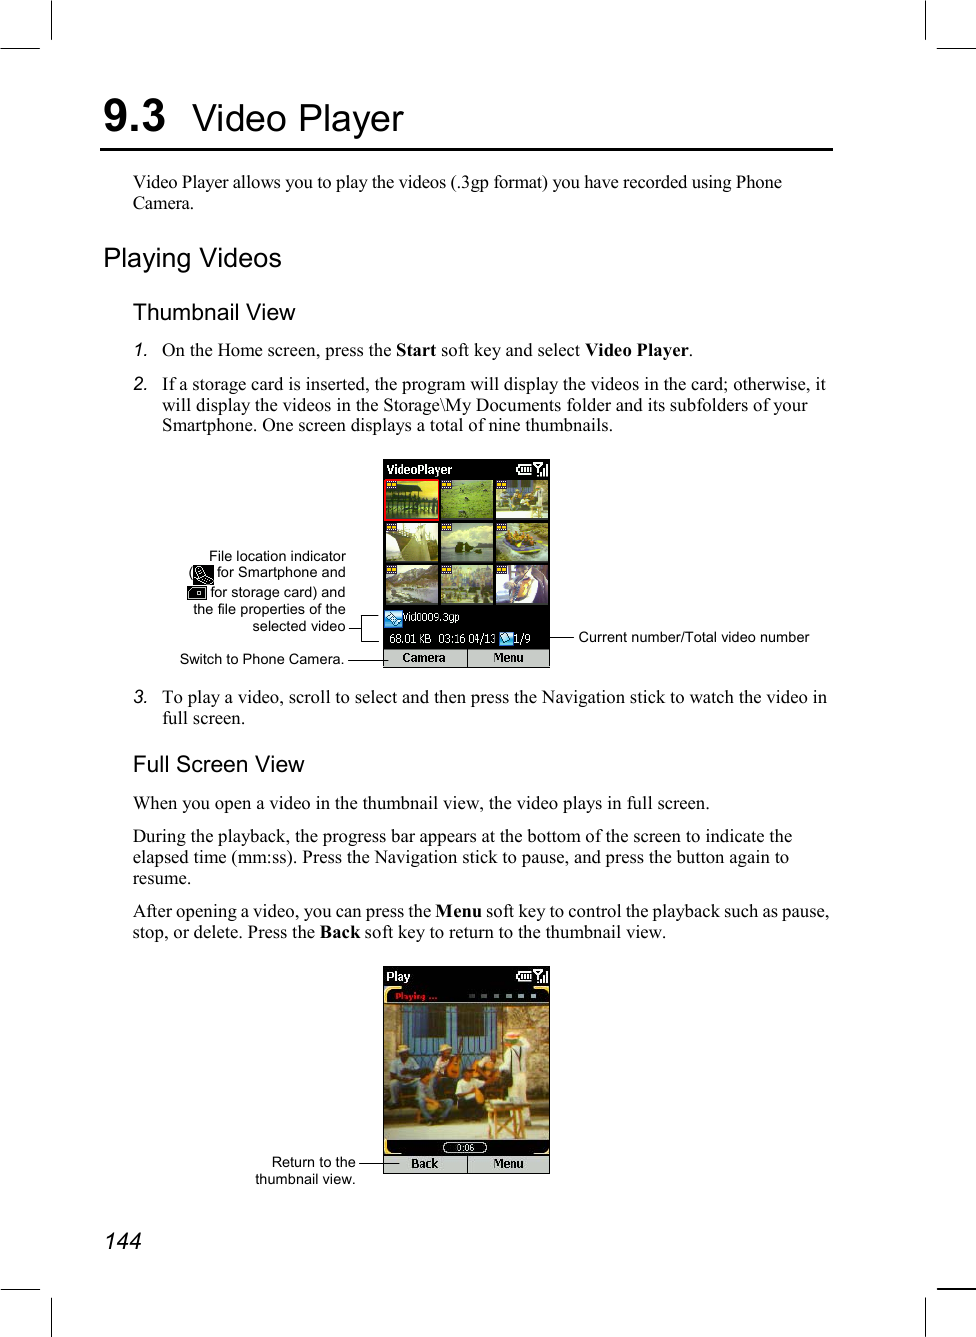  144 9.3  Video Player Video Player allows you to play the videos (.3gp format) you have recorded using Phone Camera.  Playing Videos Thumbnail View 1.  On the Home screen, press the Start soft key and select Video Player. 2.  If a storage card is inserted, the program will display the videos in the card; otherwise, it will display the videos in the Storage\My Documents folder and its subfolders of your Smartphone. One screen displays a total of nine thumbnails.  3.  To play a video, scroll to select and then press the Navigation stick to watch the video in full screen. Full Screen View When you open a video in the thumbnail view, the video plays in full screen. During the playback, the progress bar appears at the bottom of the screen to indicate the elapsed time (mm:ss). Press the Navigation stick to pause, and press the button again to resume. After opening a video, you can press the Menu soft key to control the playback such as pause, stop, or delete. Press the Back soft key to return to the thumbnail view.  Return to thethumbnail view.Switch to Phone Camera.Current number/Total video number File location indicator( for Smartphone and for storage card) andthe file properties of theselected video